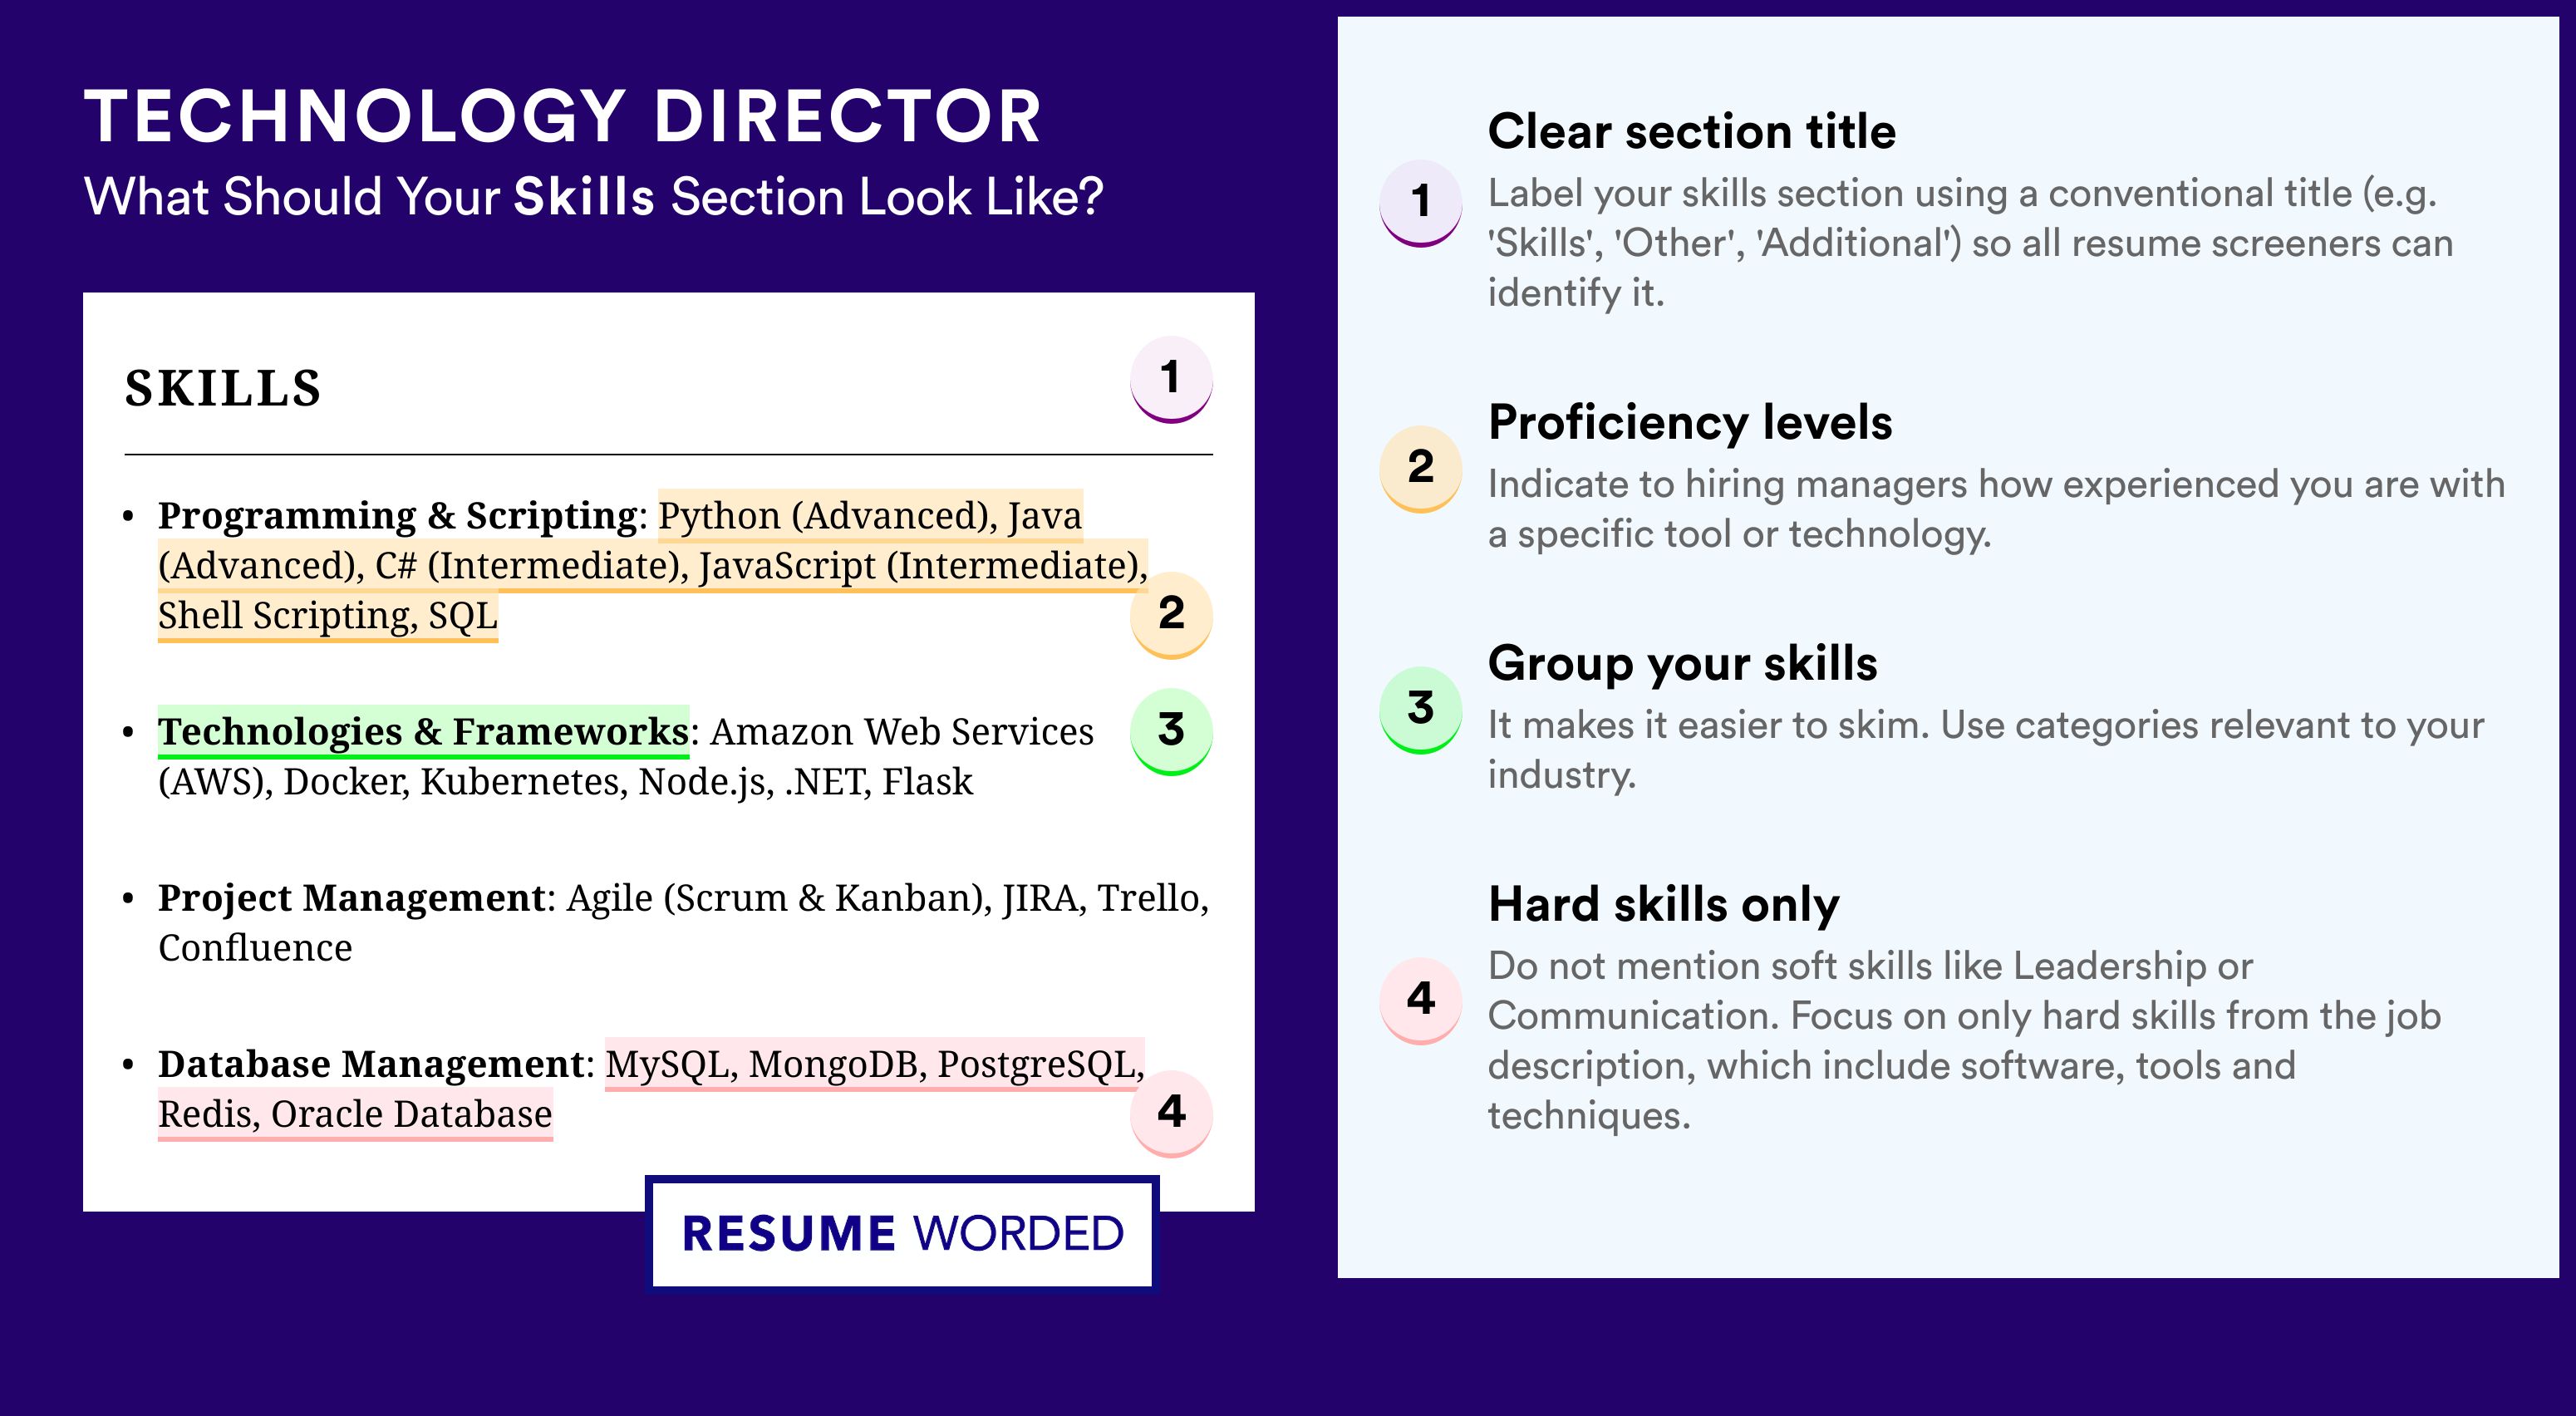 How To Write Your Skills Section - Technology Director Roles